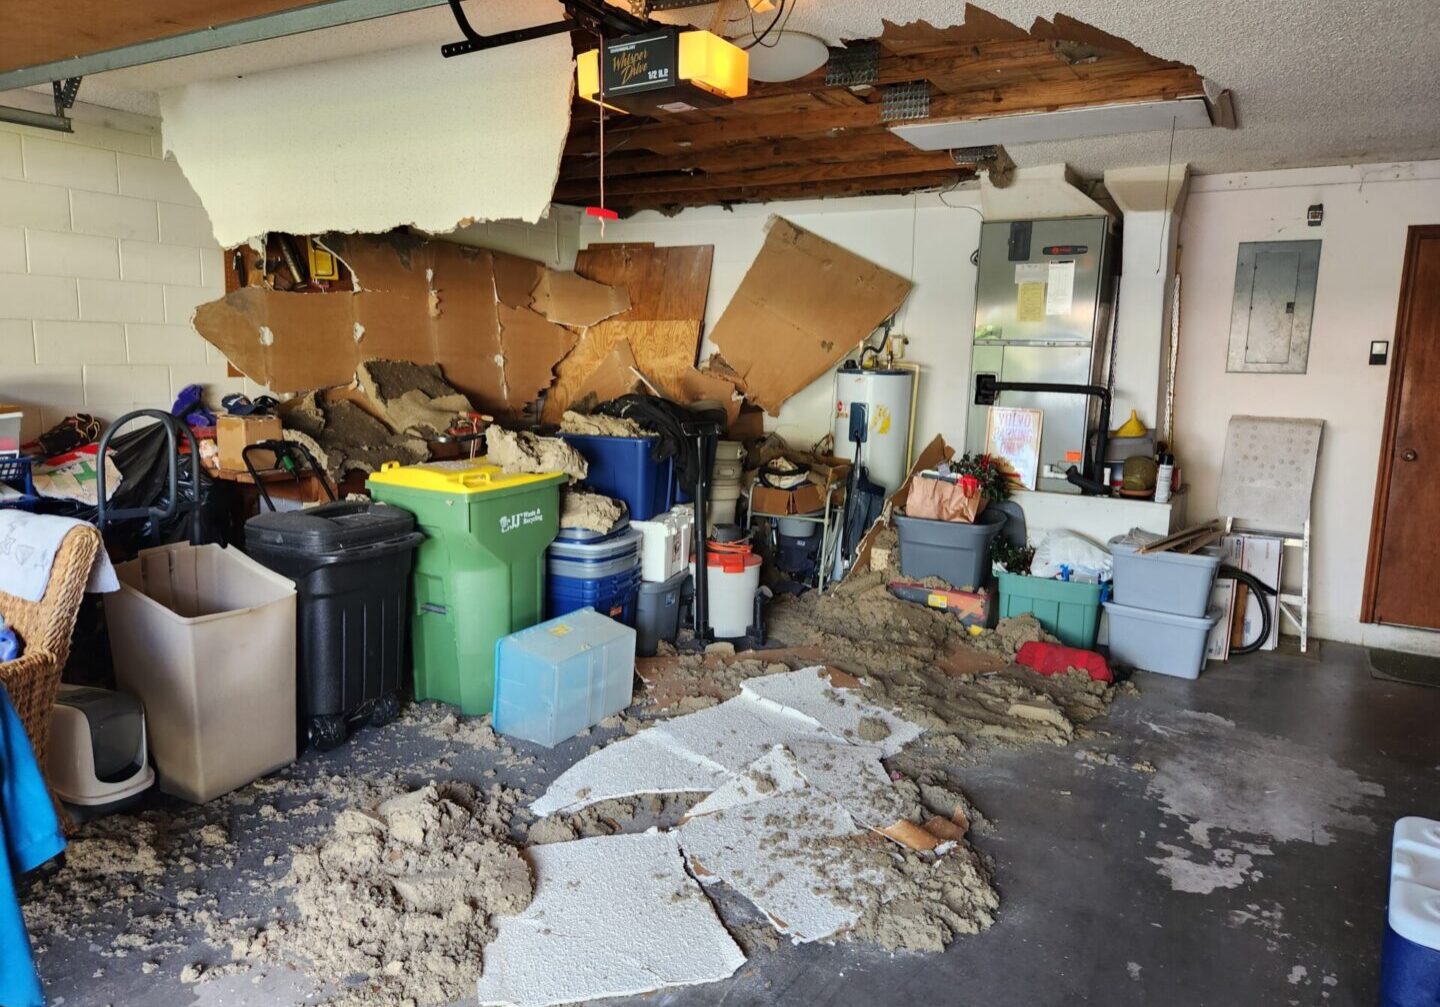 A garage with many boxes and debris on the floor.